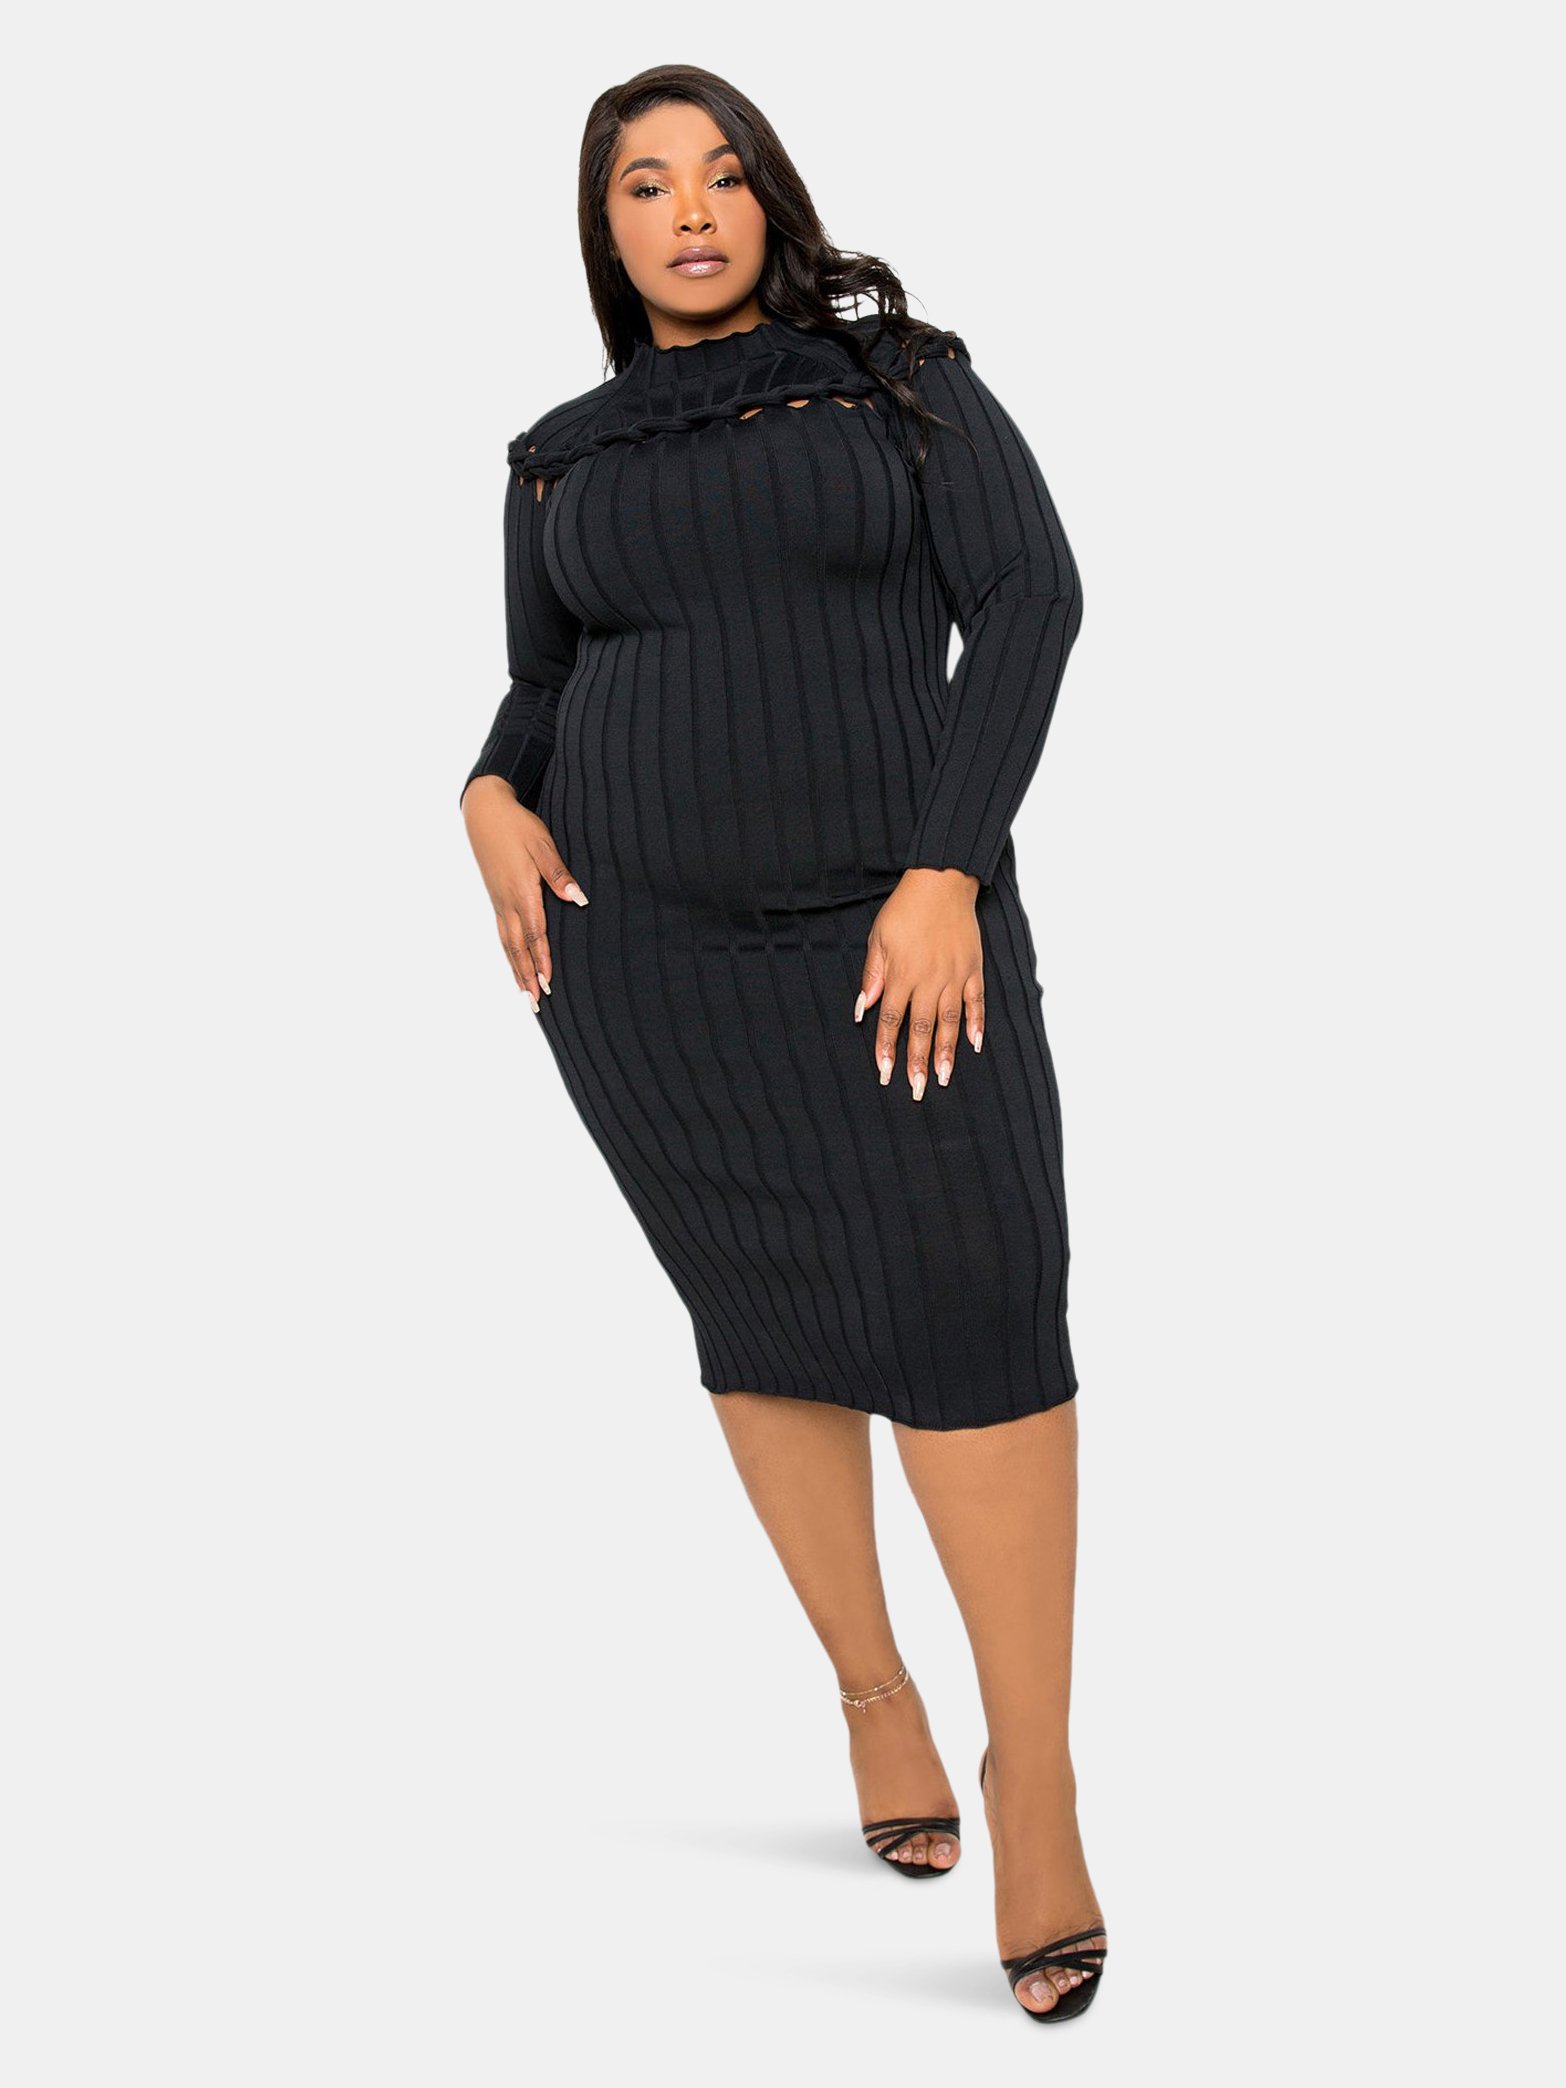 Her lip to Sparkle Ribbed-Knit Dress